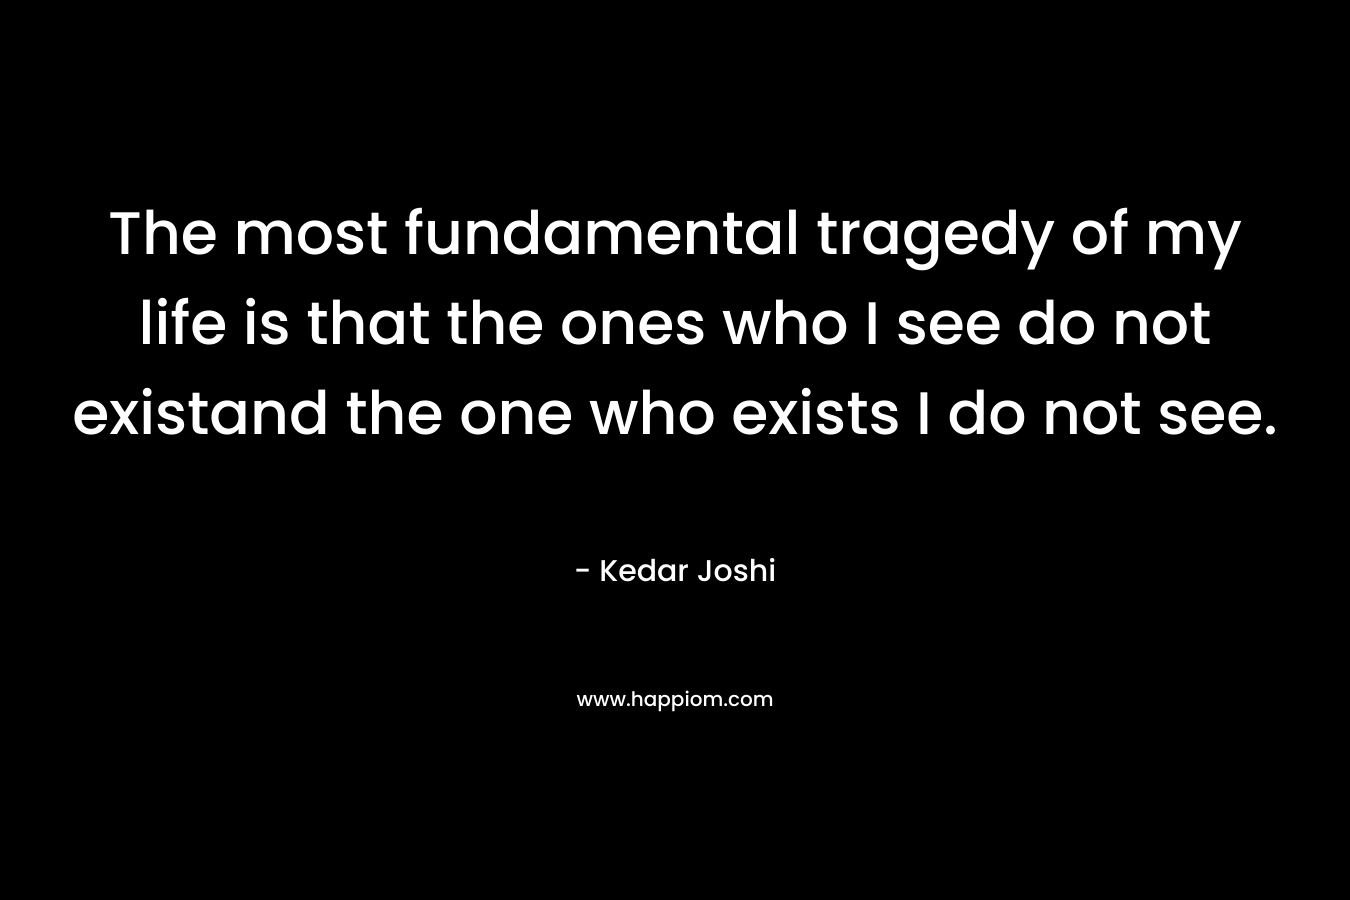 The most fundamental tragedy of my life is that the ones who I see do not existand the one who exists I do not see. – Kedar Joshi